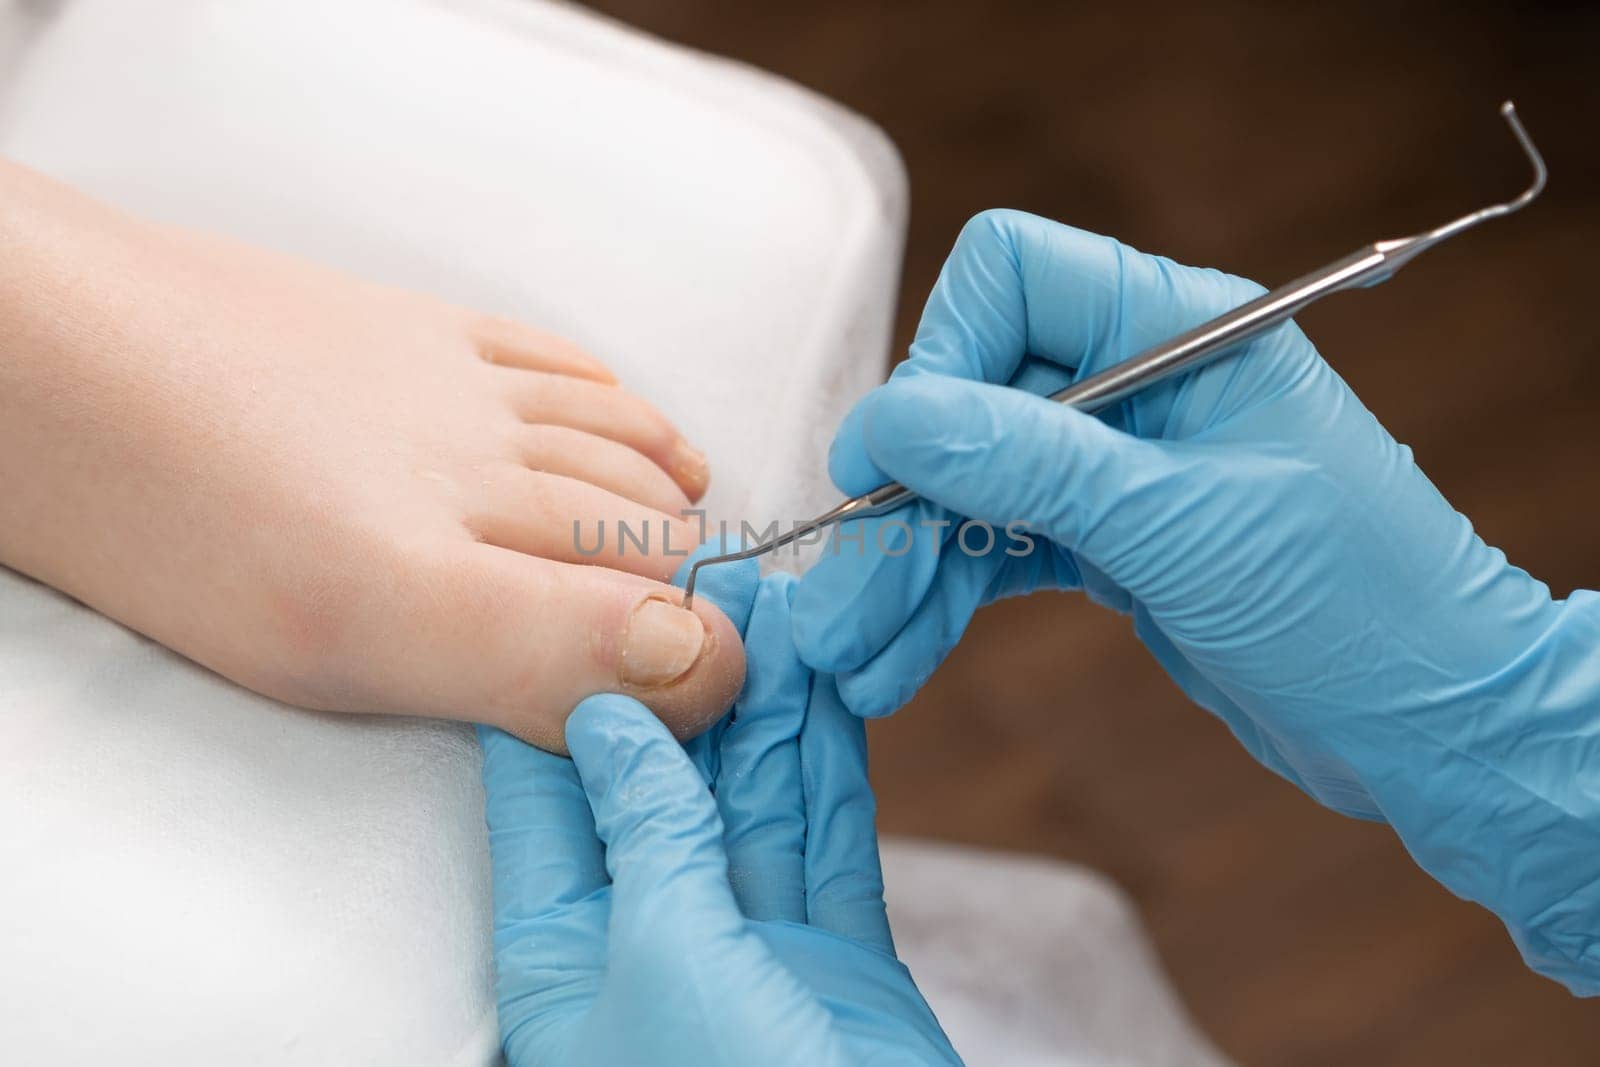 Podiatrist administering treatment for a fungal infection on a womans toenail.